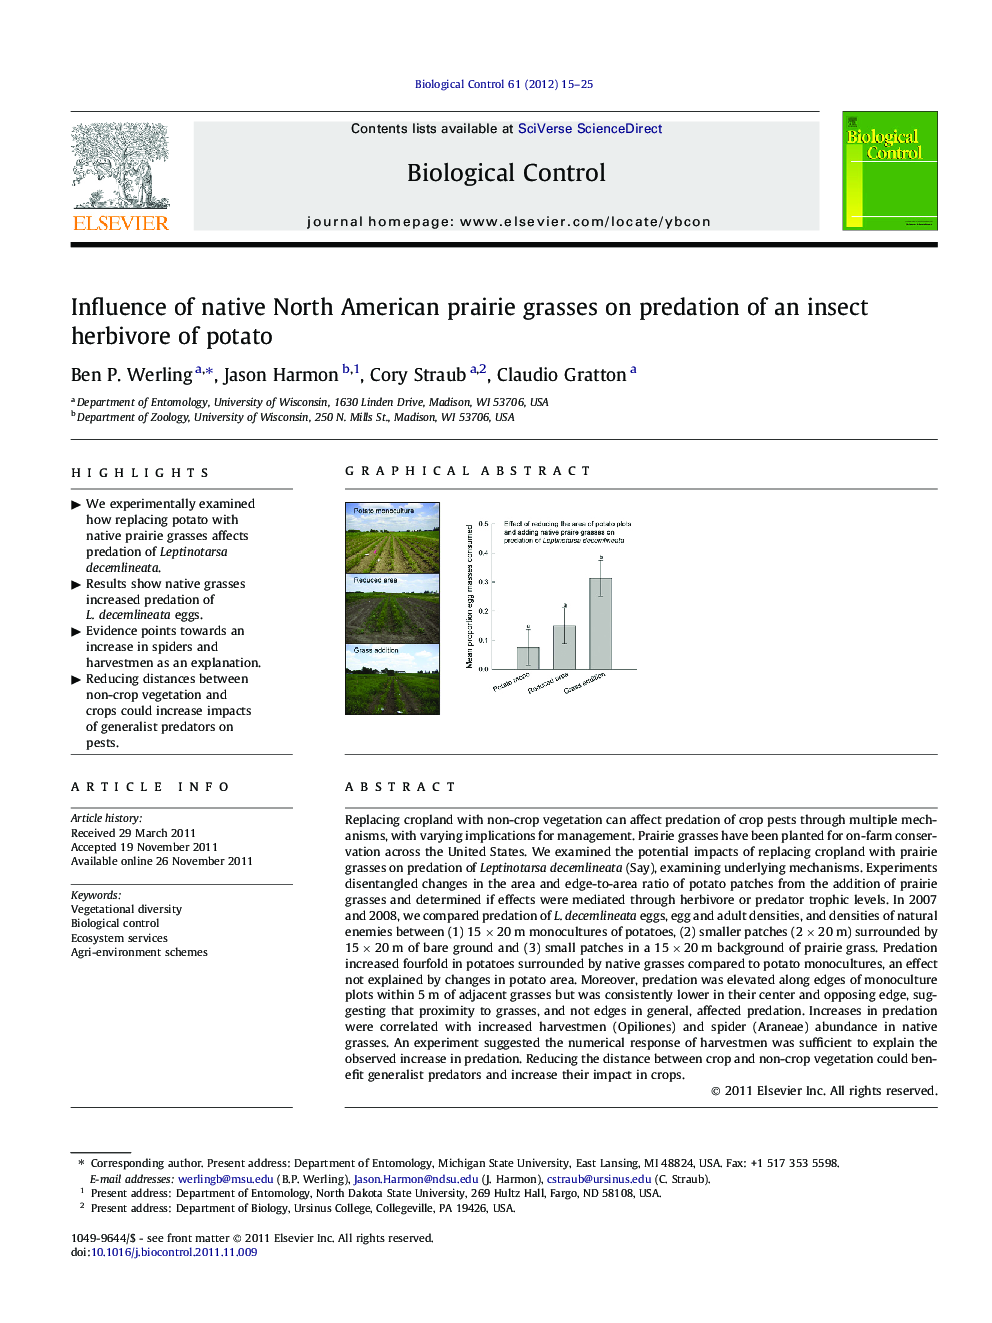 Influence of native North American prairie grasses on predation of an insect herbivore of potato